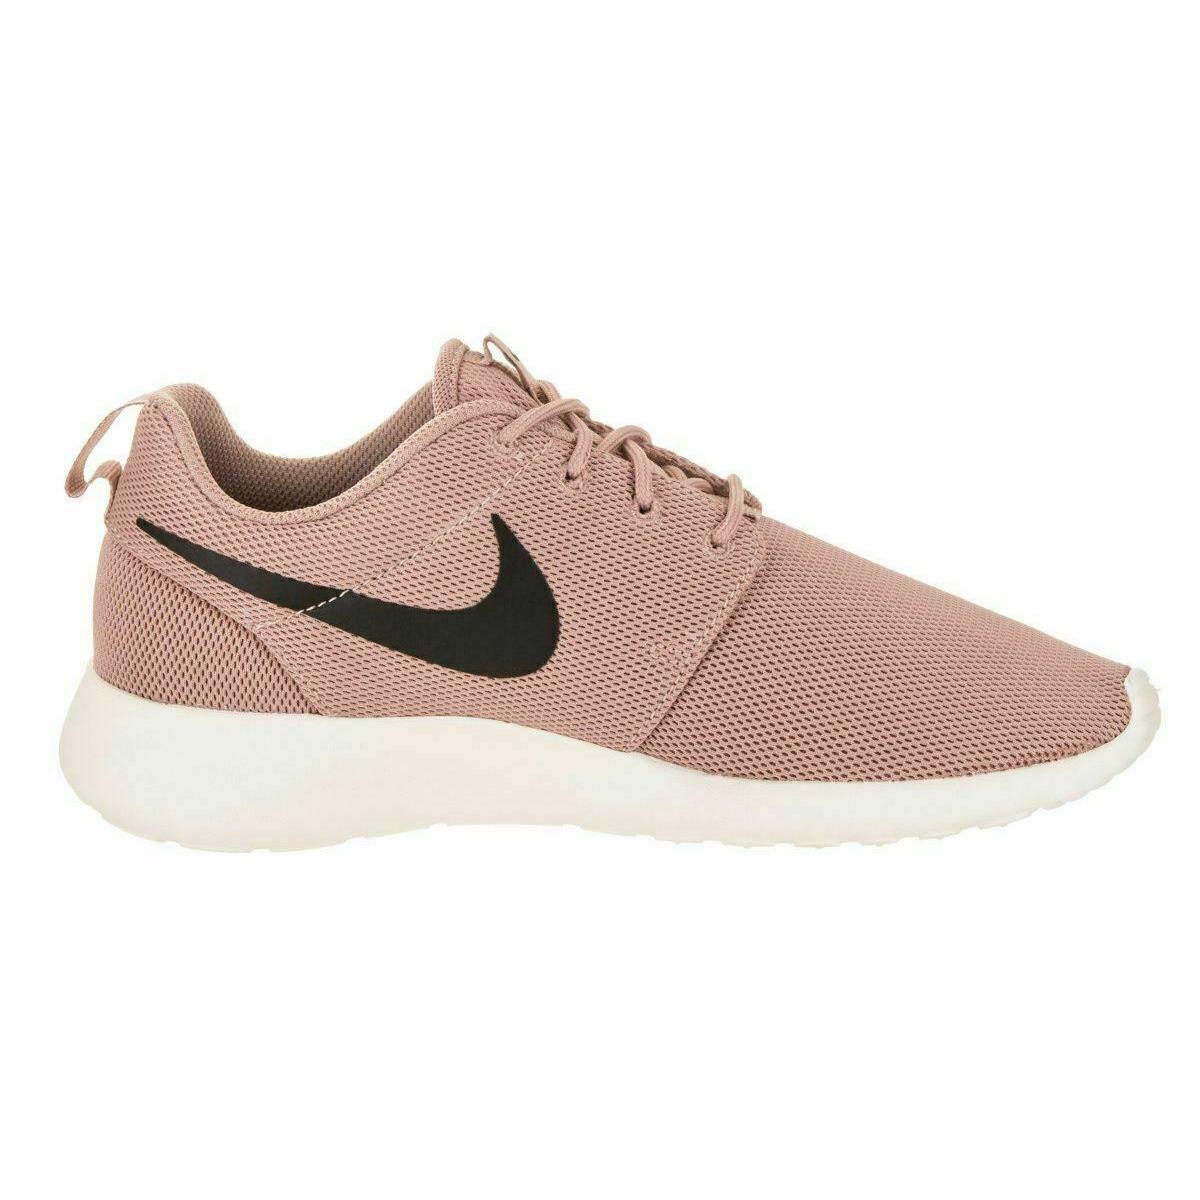 Nike shoes Roshe One - Brown & White 4